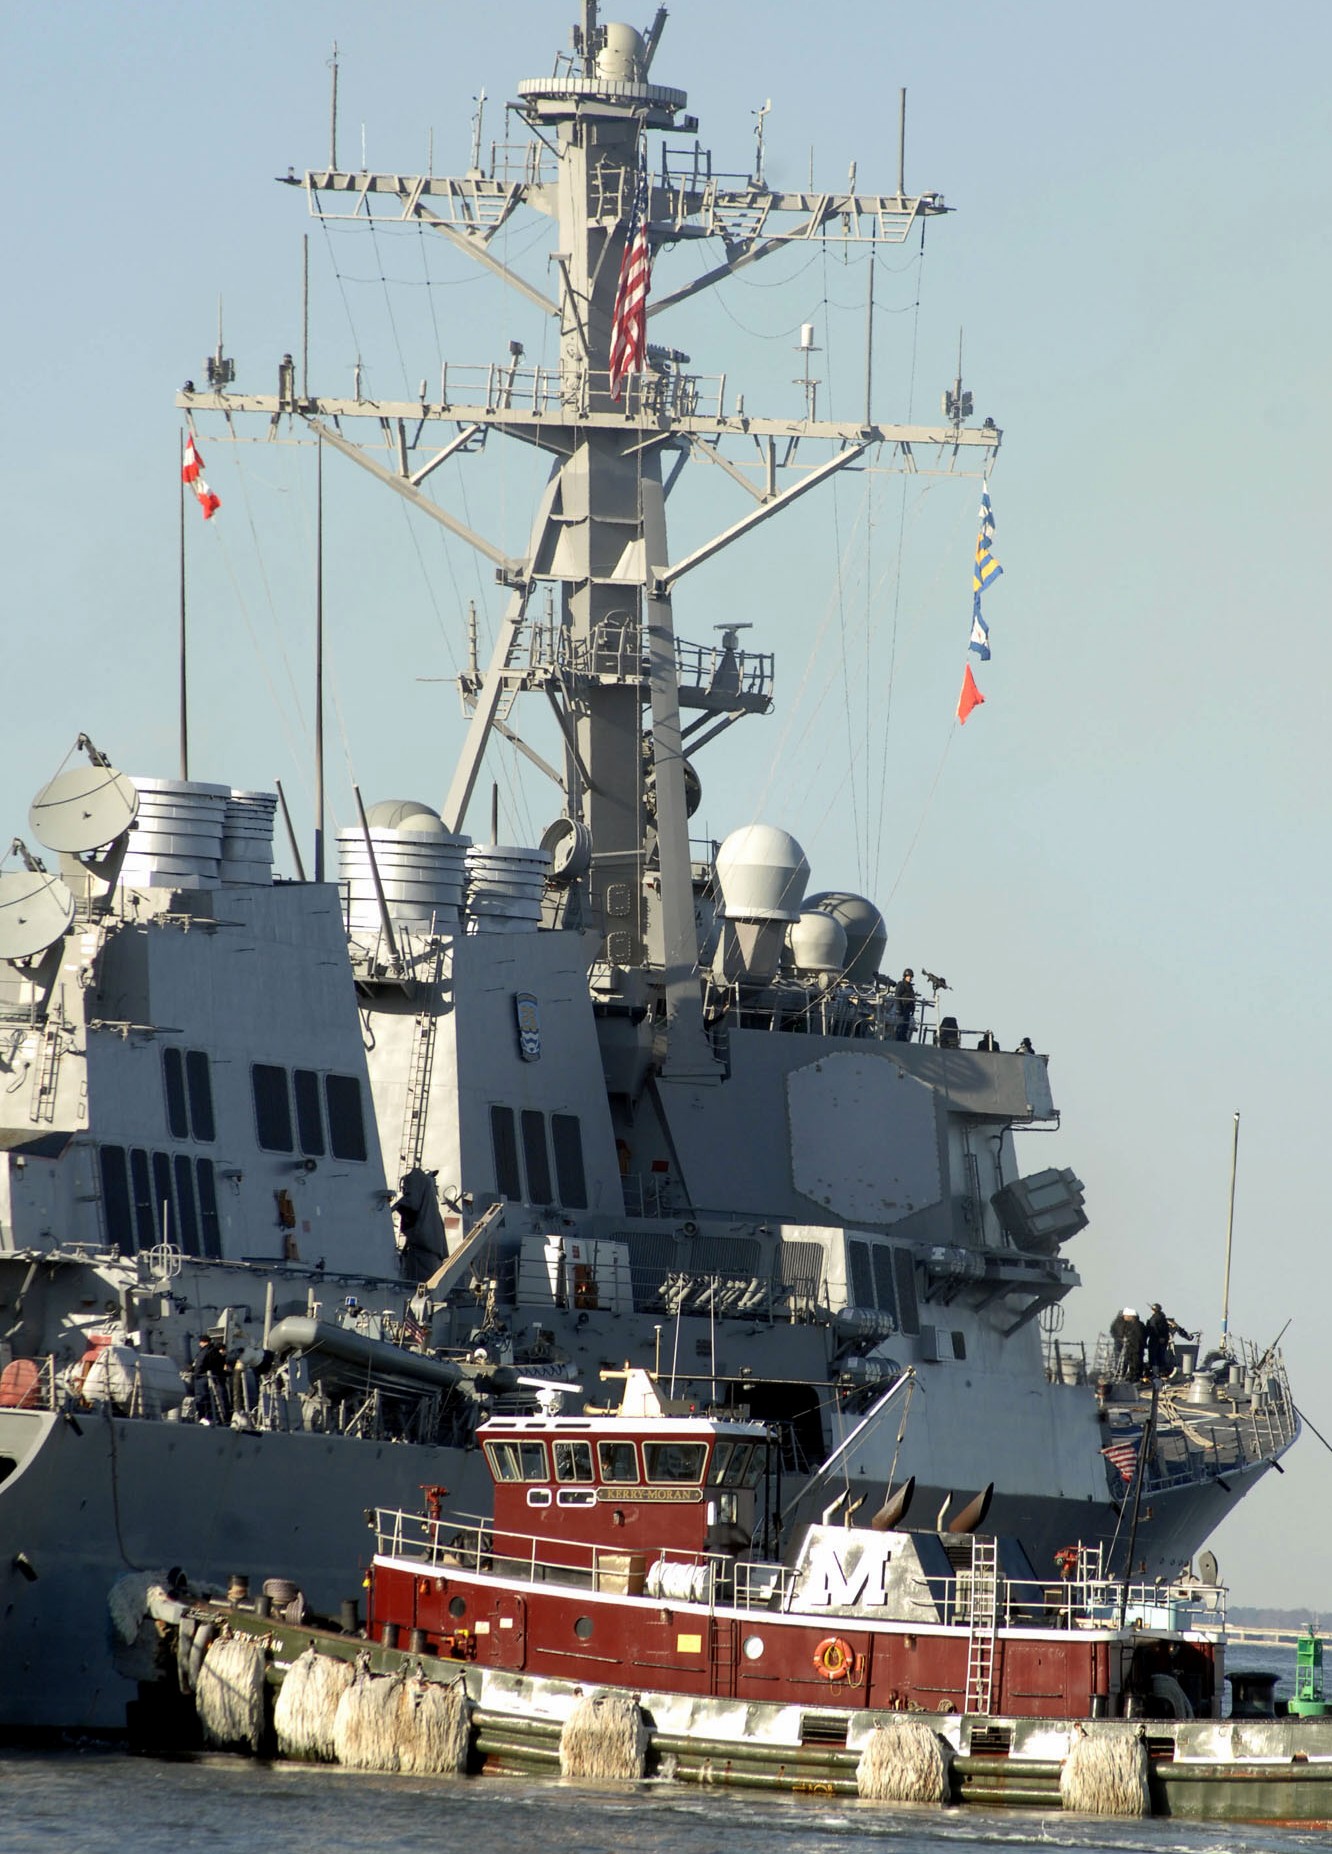 ddg-71 uss ross guided missile destroyer arleigh burke class aegis bmd 90